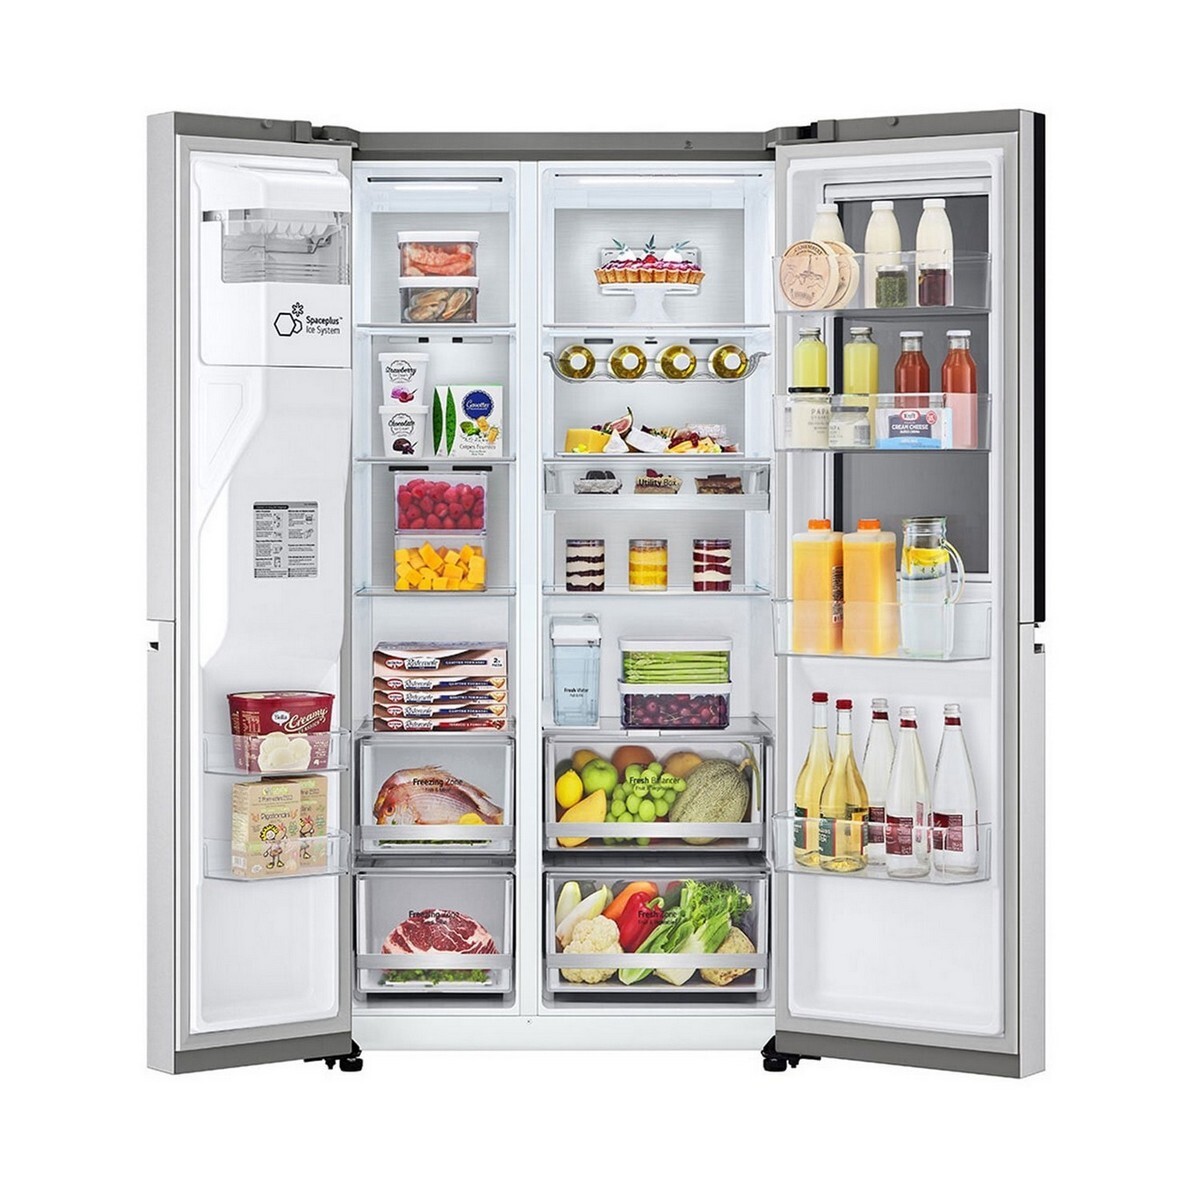 LG Side-by-Side Refrigerator GL-X257ABSX 635L Steel Finish